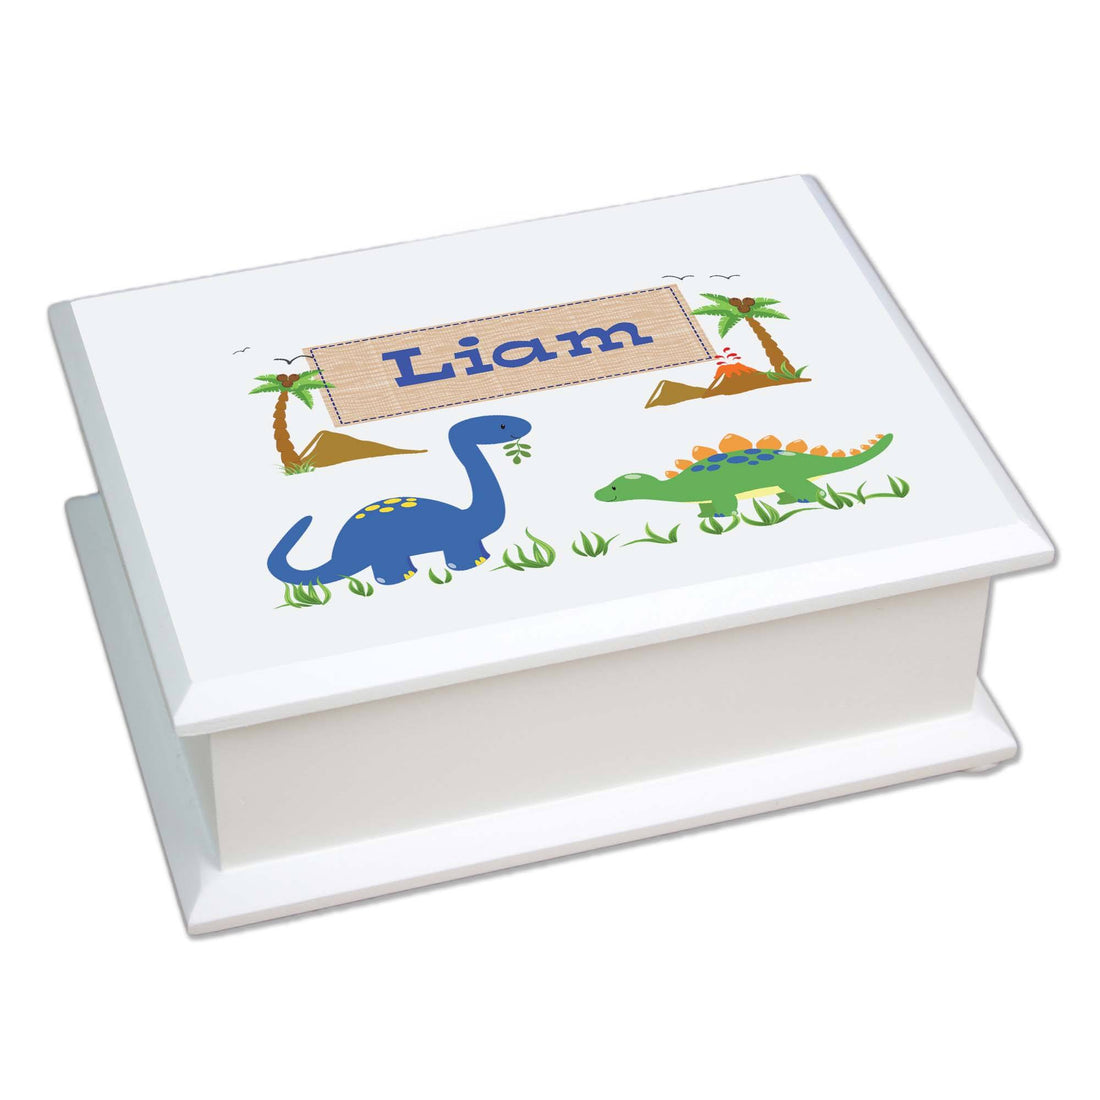 Personalized Lift Top Jewelry Box with Dinosaurs design